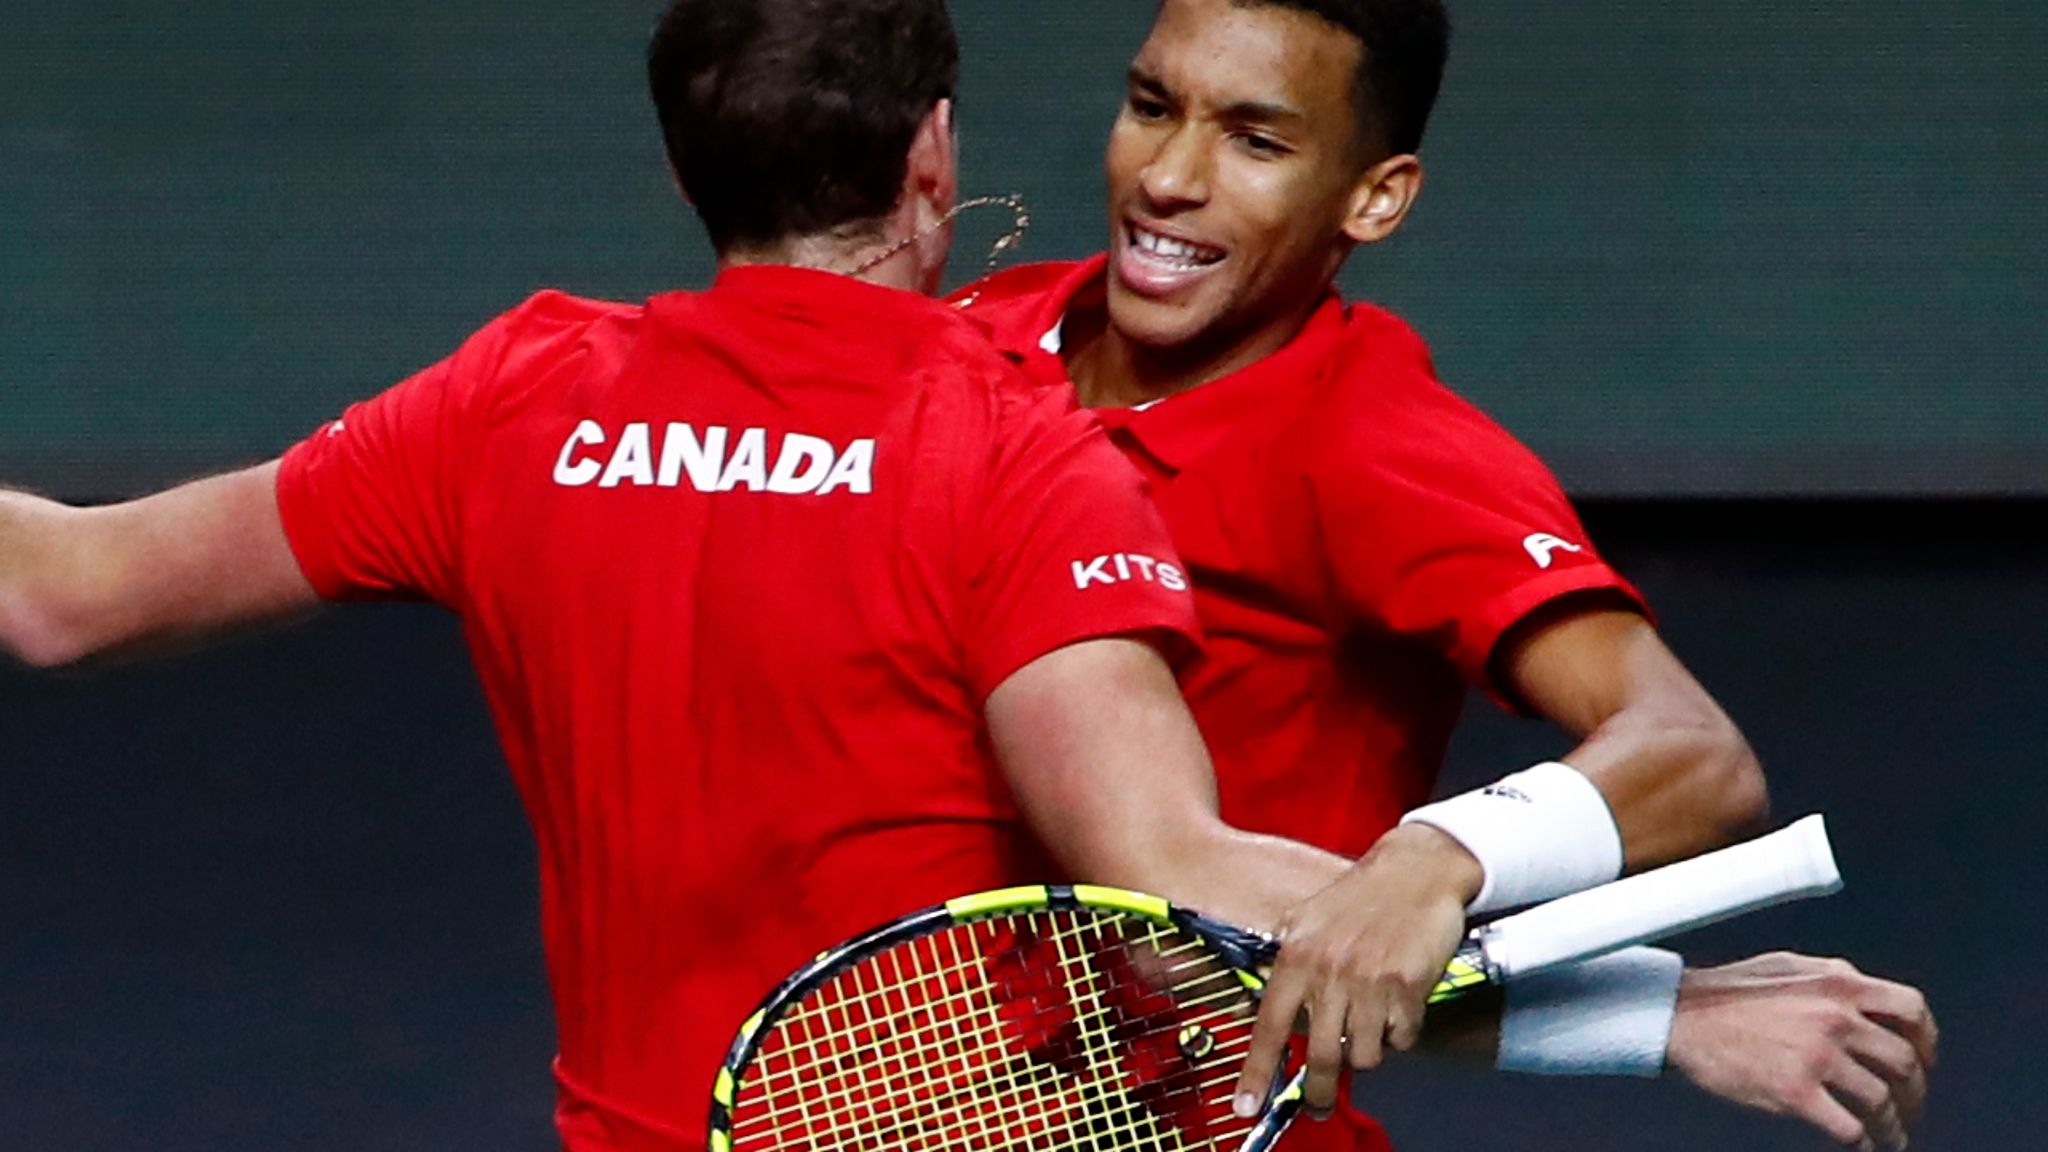 Davis Cup Canada to face Australia in final after Felix Auger-Aliassime inspires win over Italy Tennis News Sky Sports